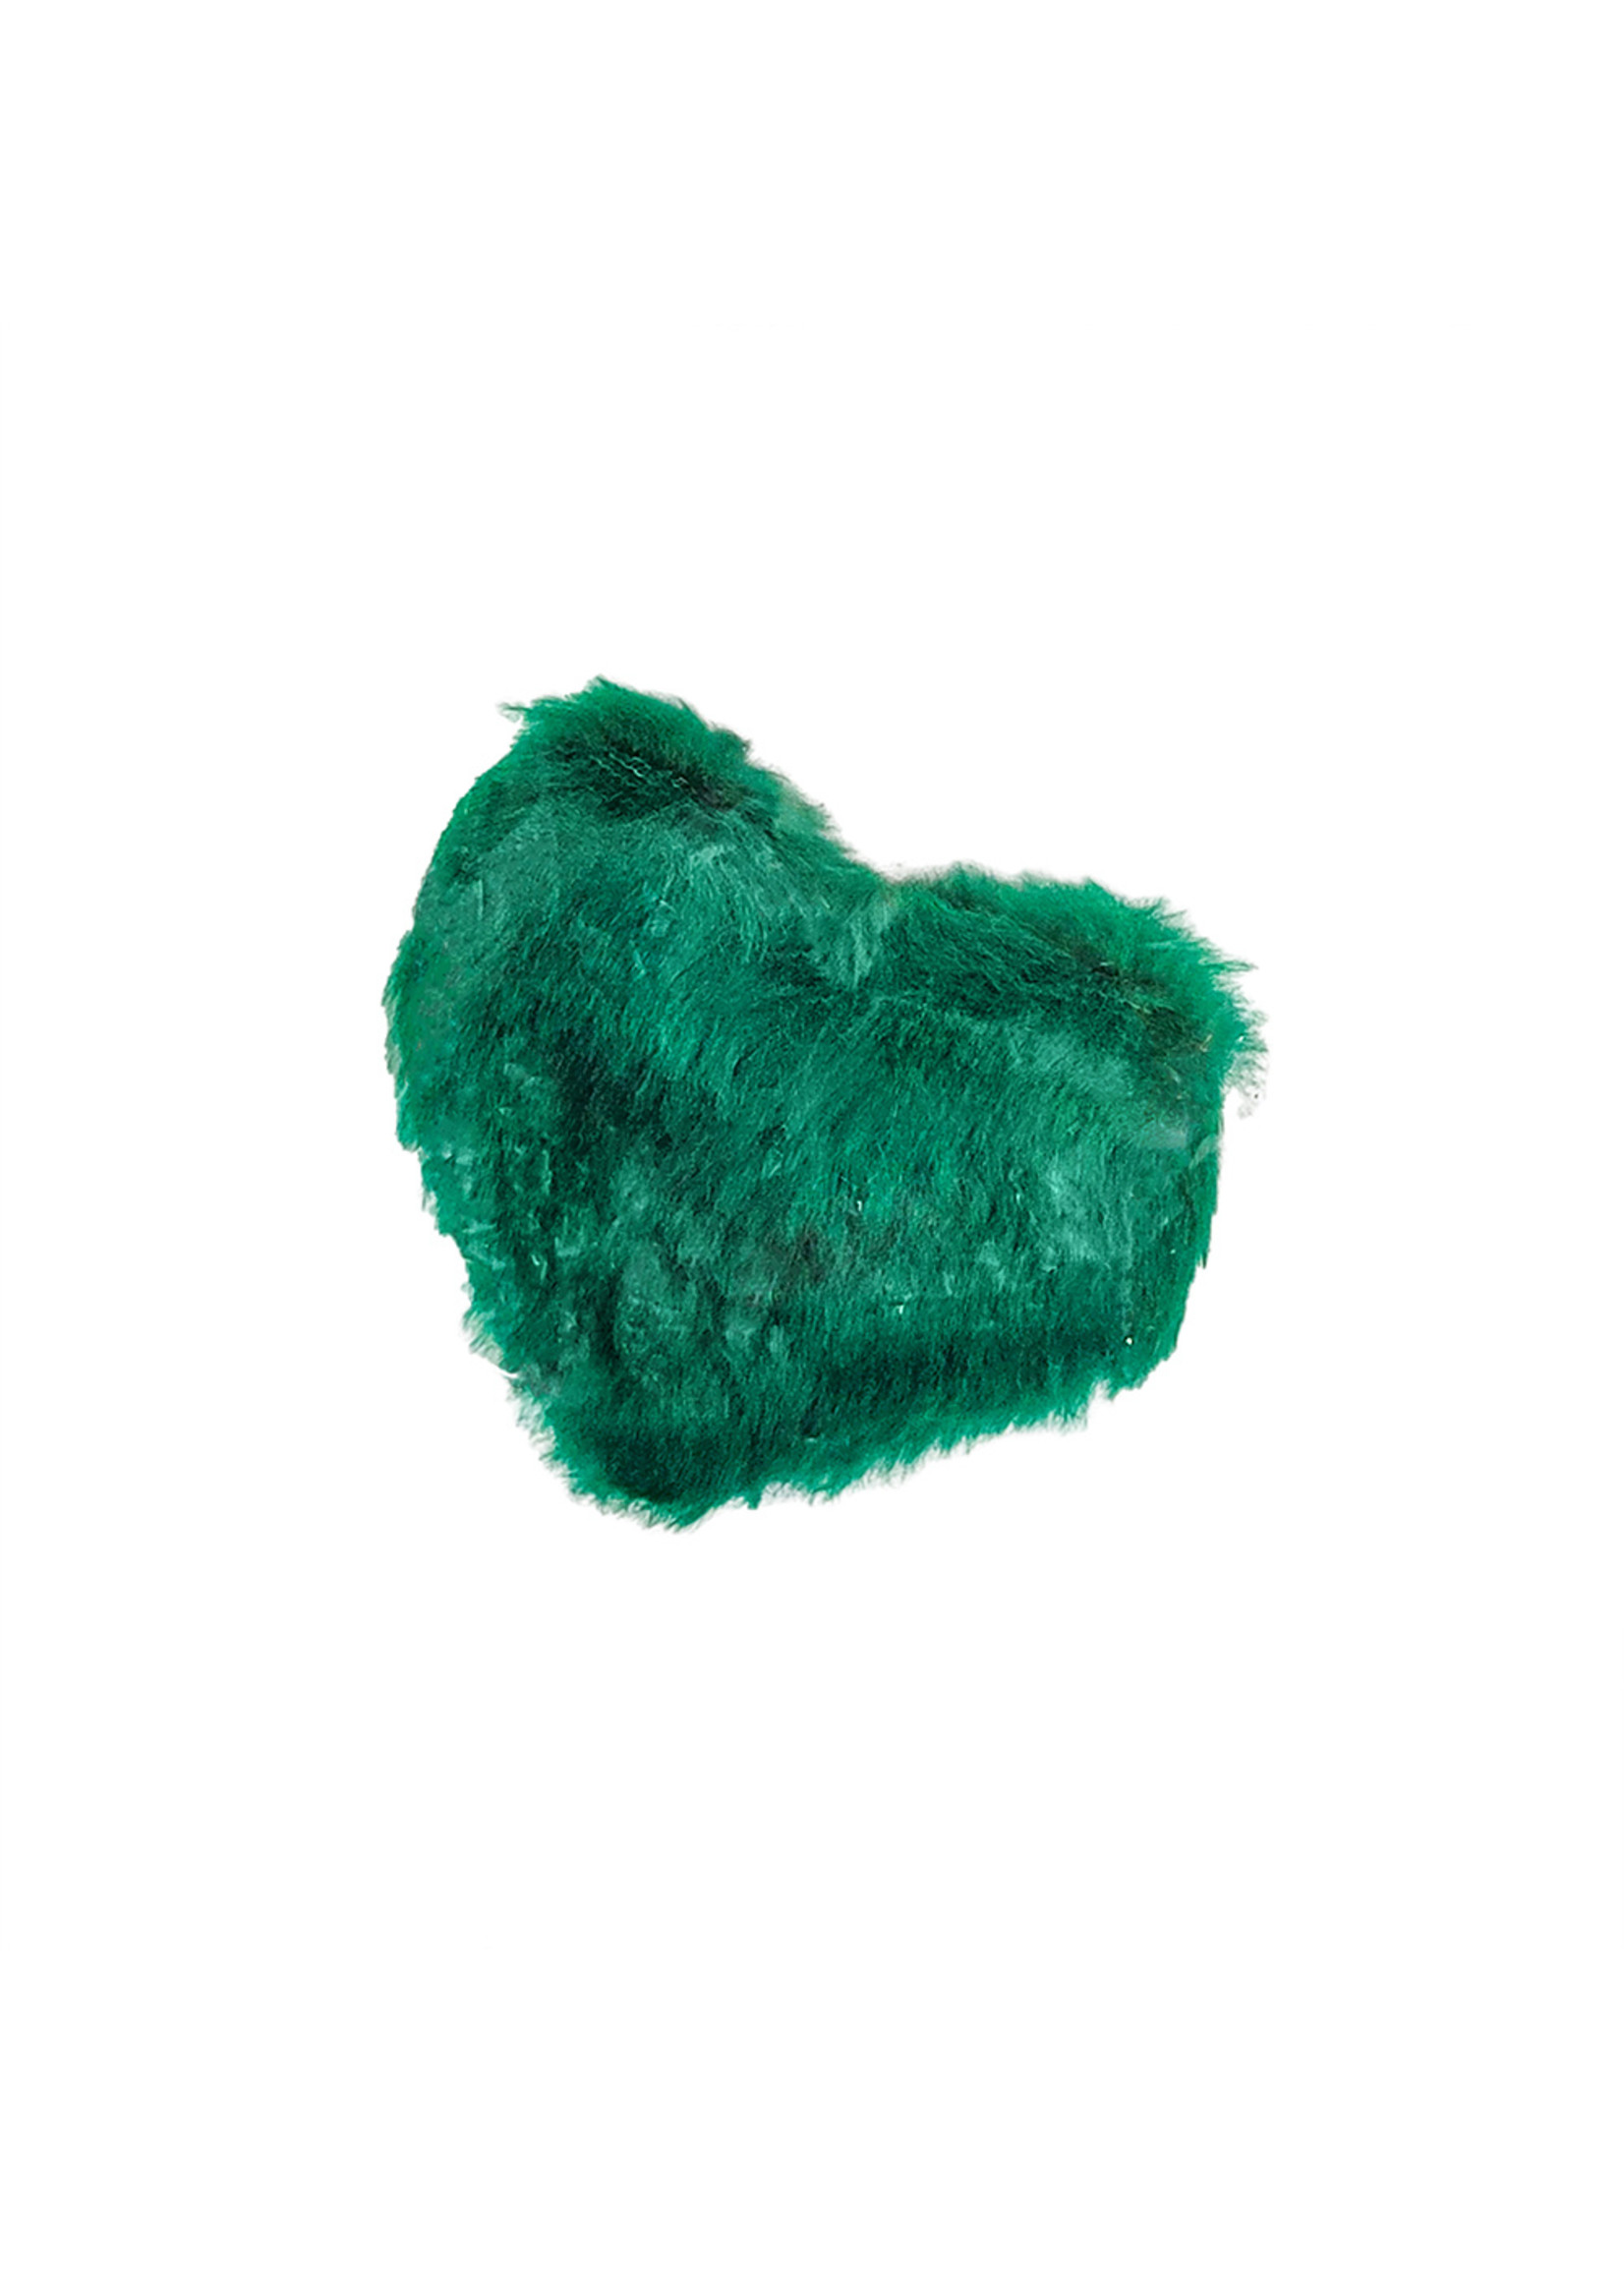 Mutts And Mittens Green Heart Cat Toy